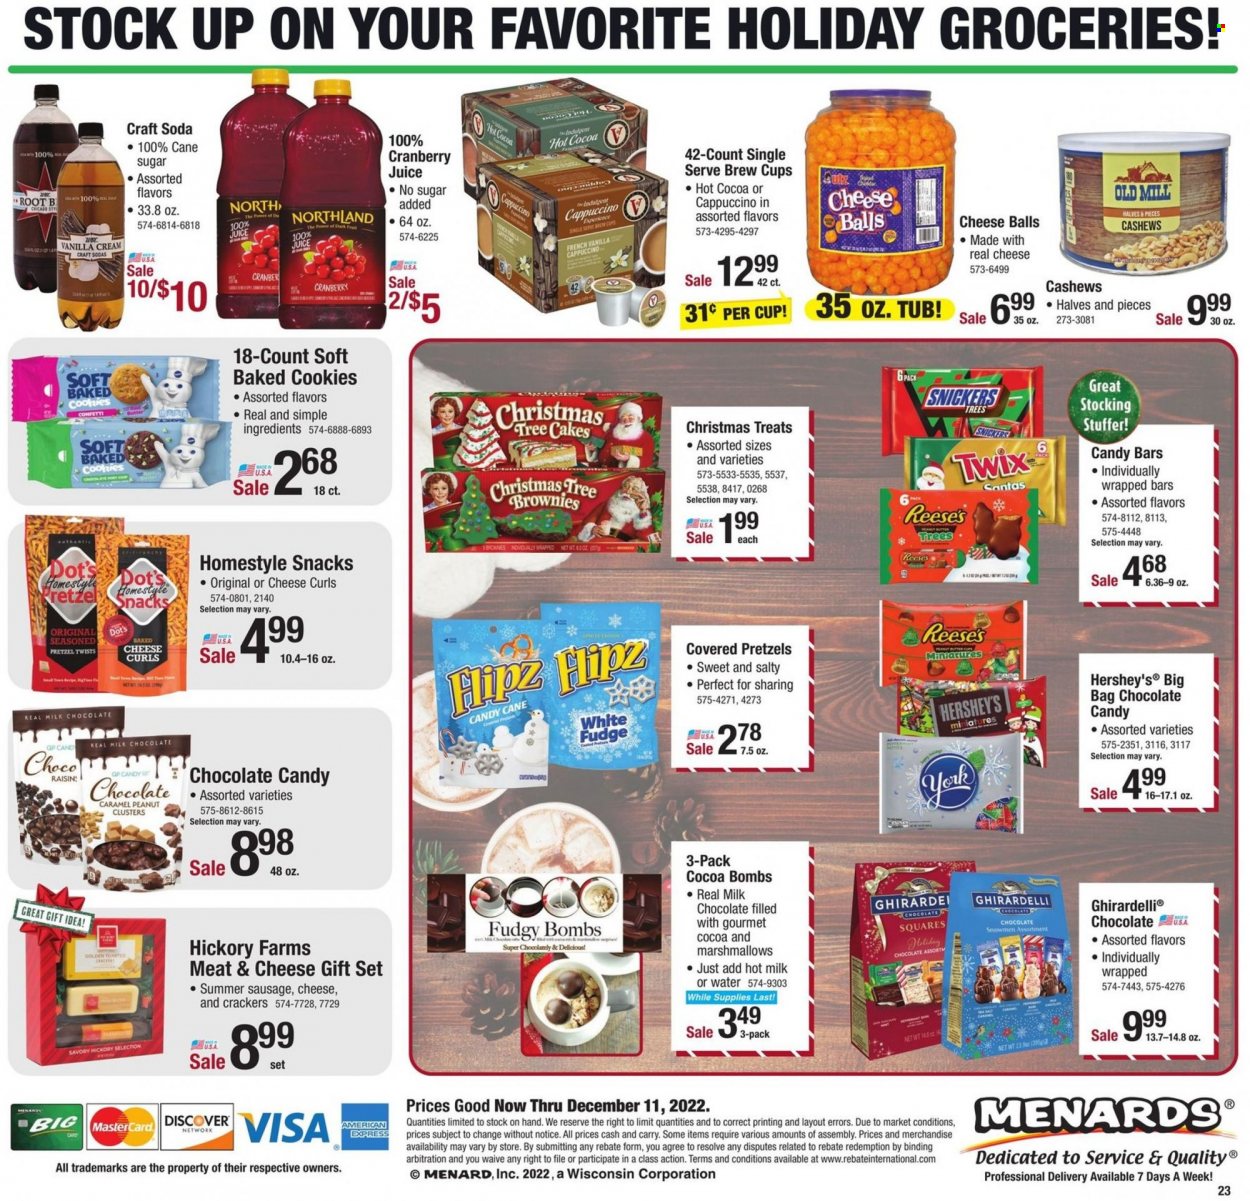 thumbnail - Menards Flyer - 11/29/2022 - 12/11/2022 - Sales products - pretzels, cake, brownies, sausage, summer sausage, cheddar, Reese's, Hershey's, cookies, fudge, gift set, marshmallows, milk chocolate, snack, candy cane, Snickers, Twix, crackers, Ghirardelli, chocolate candies, caramel, peanut butter, cashews, cranberry juice, juice, soda, hot cocoa, cappuccino, bag, cup, christmas tree. Page 26.